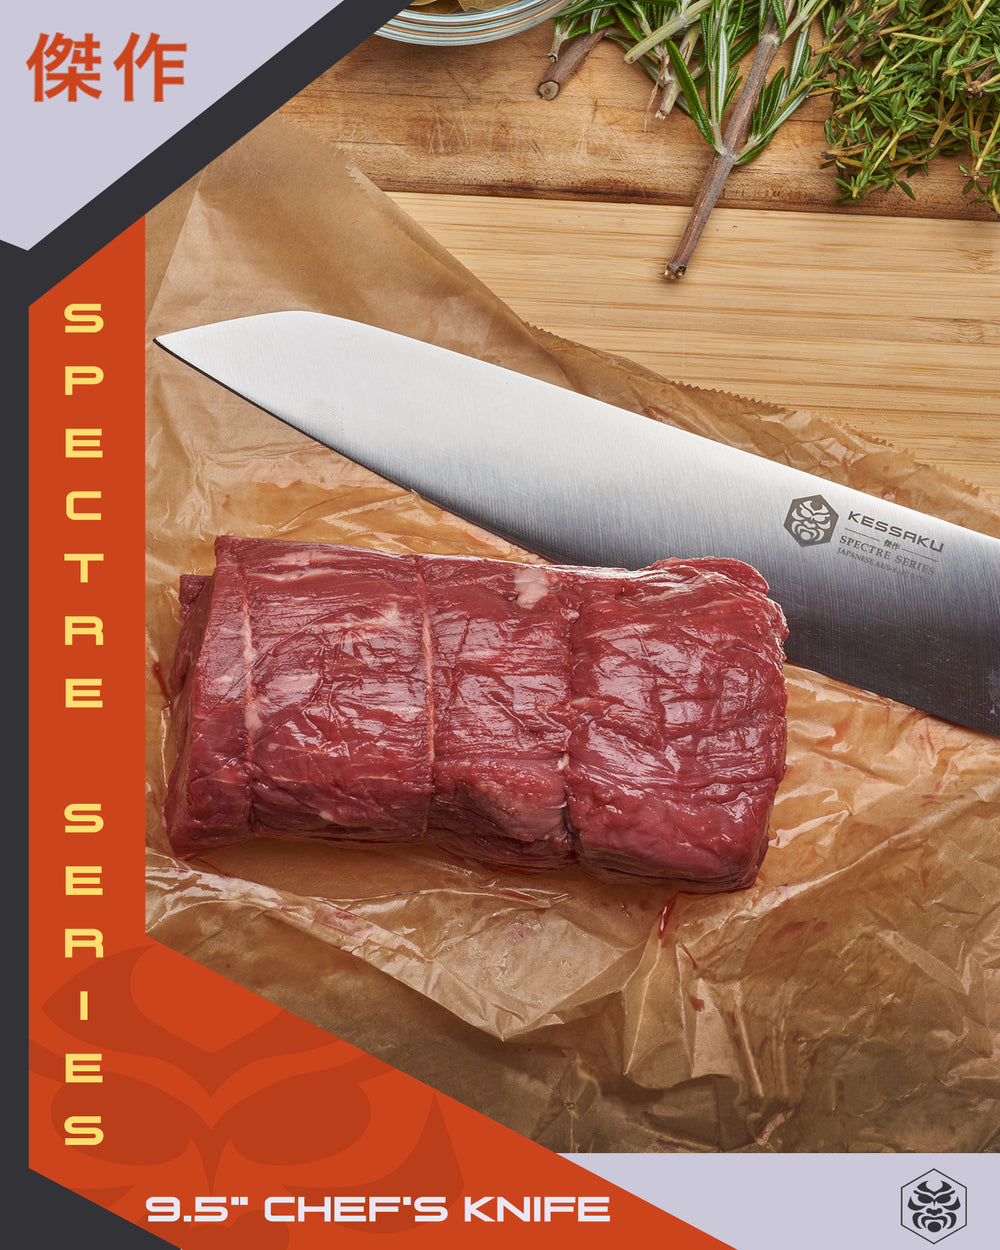 The Spectre K-Tip Chef's Knife, 16 ounce filet mignon, rosemary, and bay leaves on a cutting board